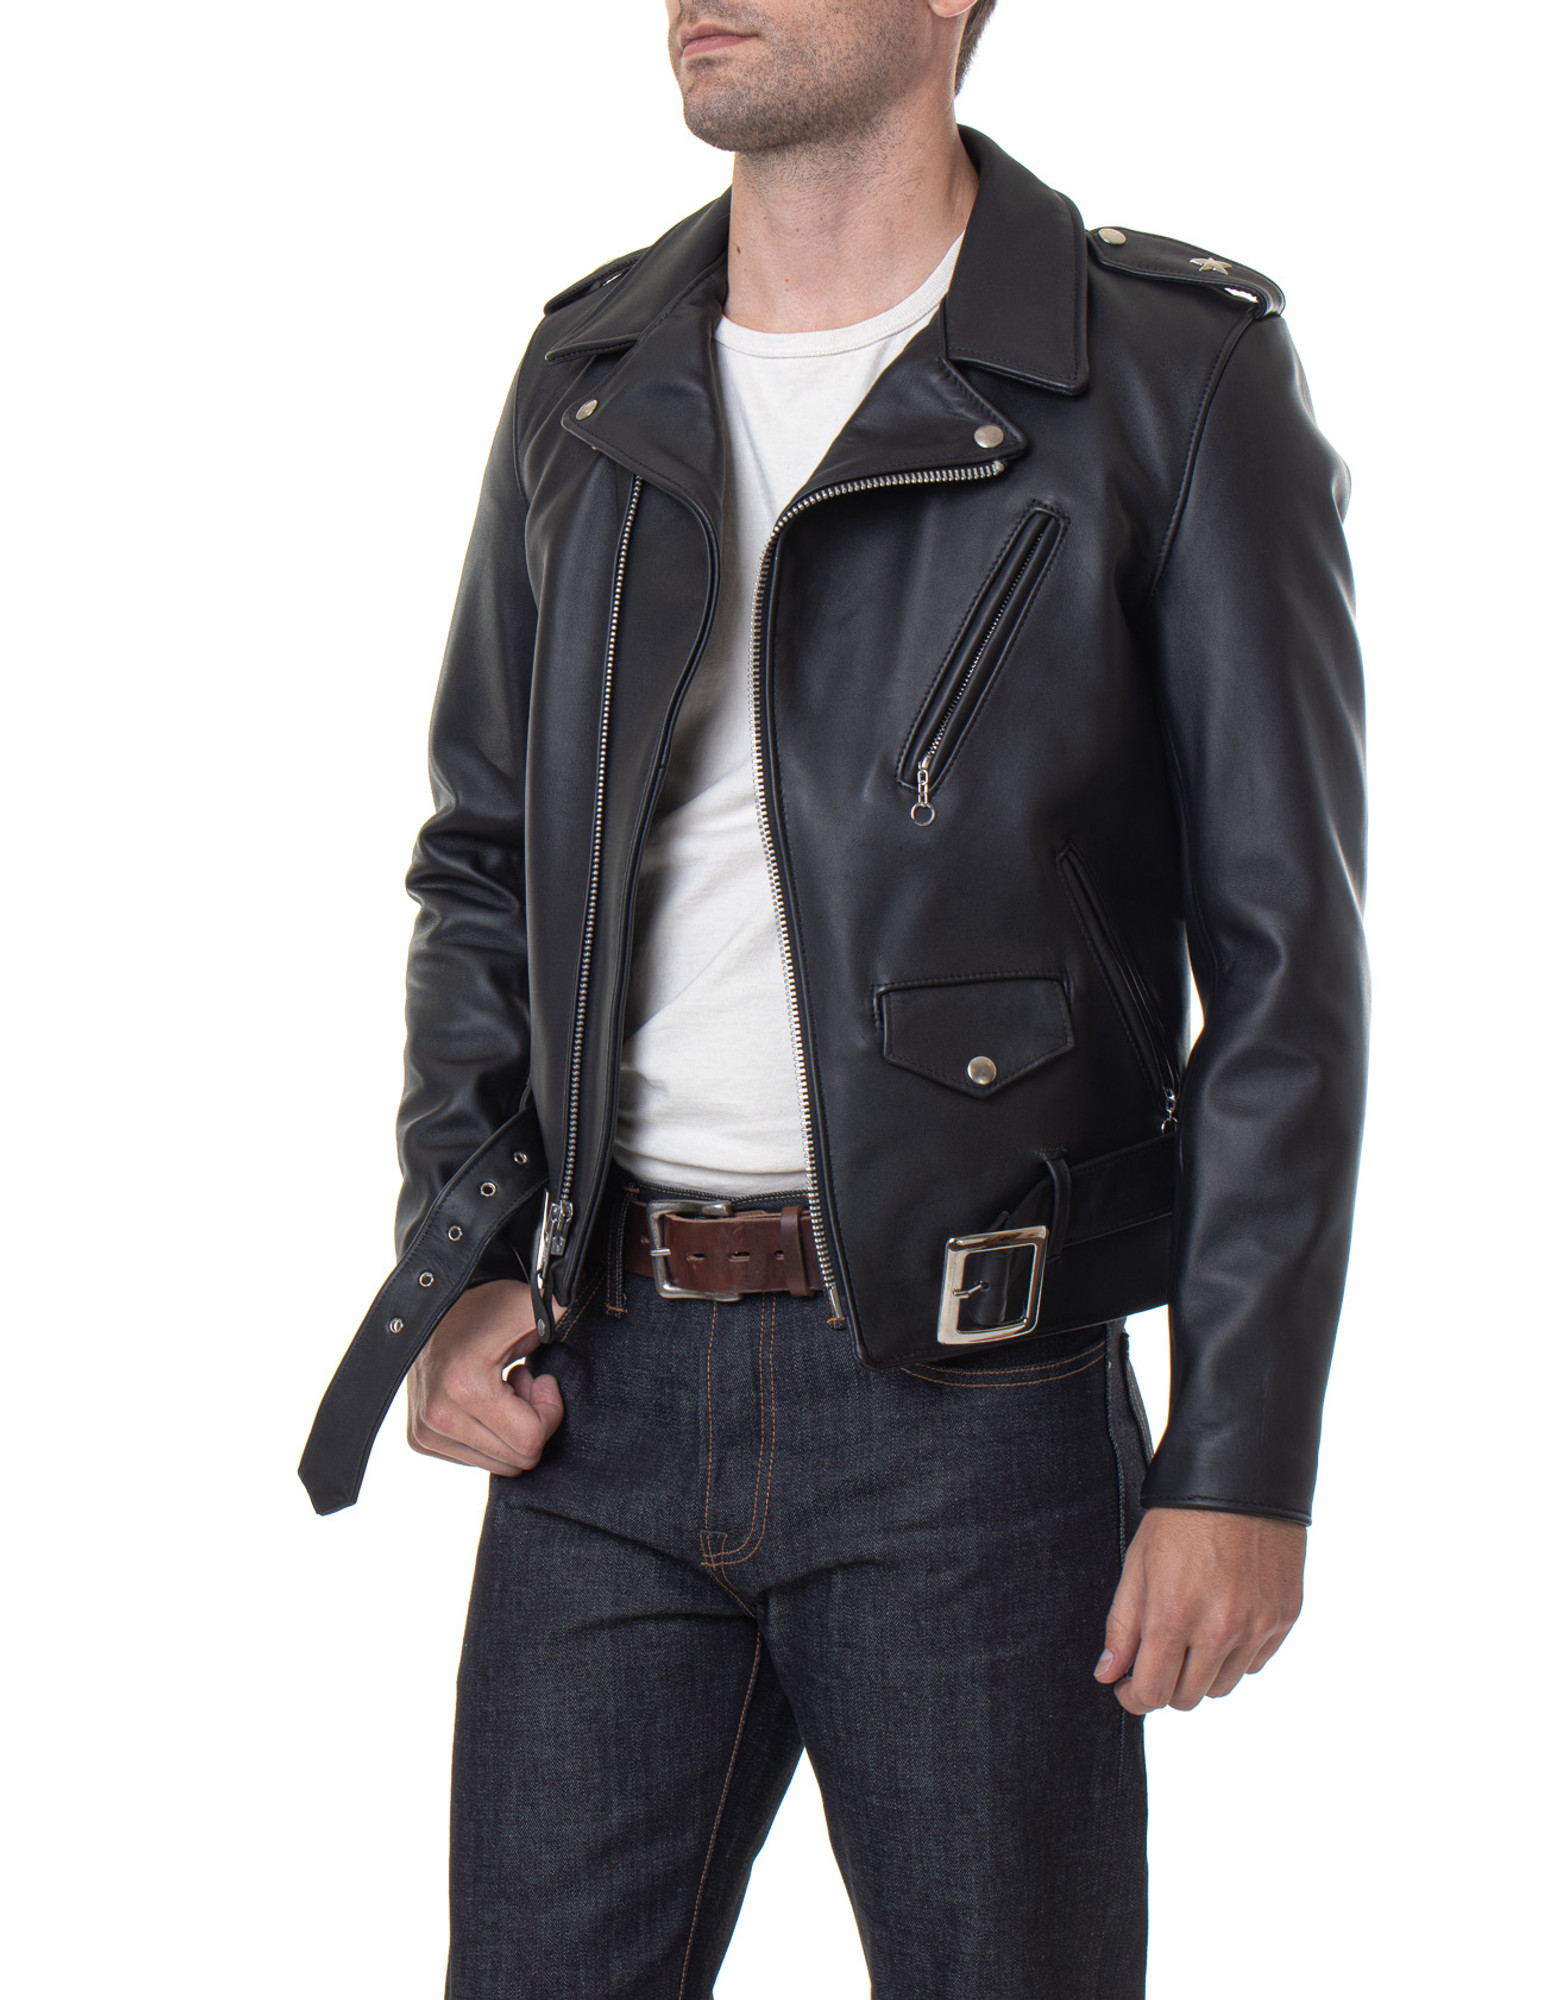 Schott One Star Perfecto Leather Motorcycle Jacket